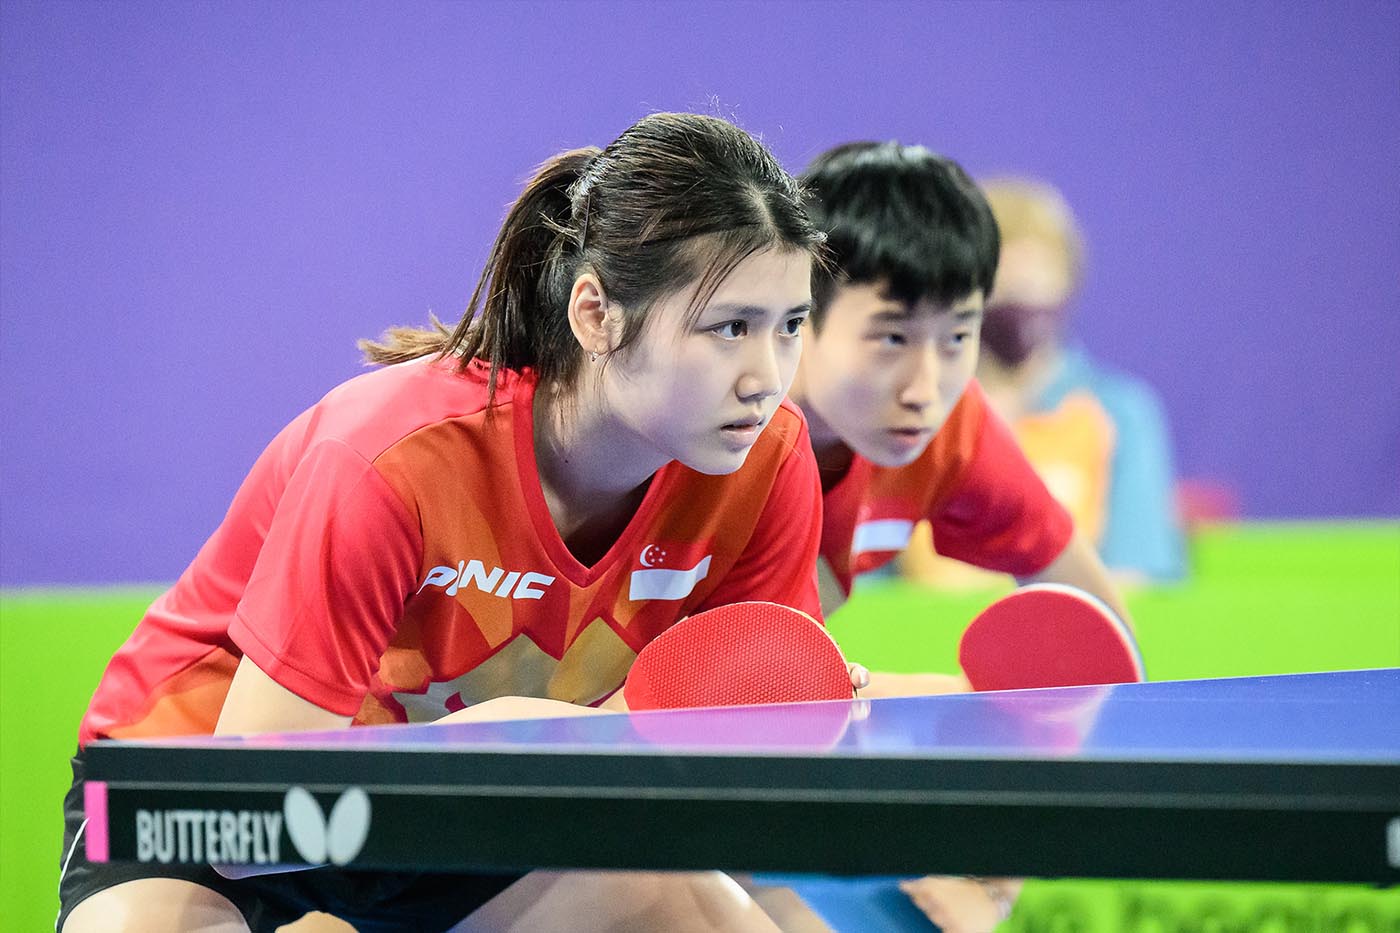 GIVING HER BEST SHOT AT TABLE TENNIS